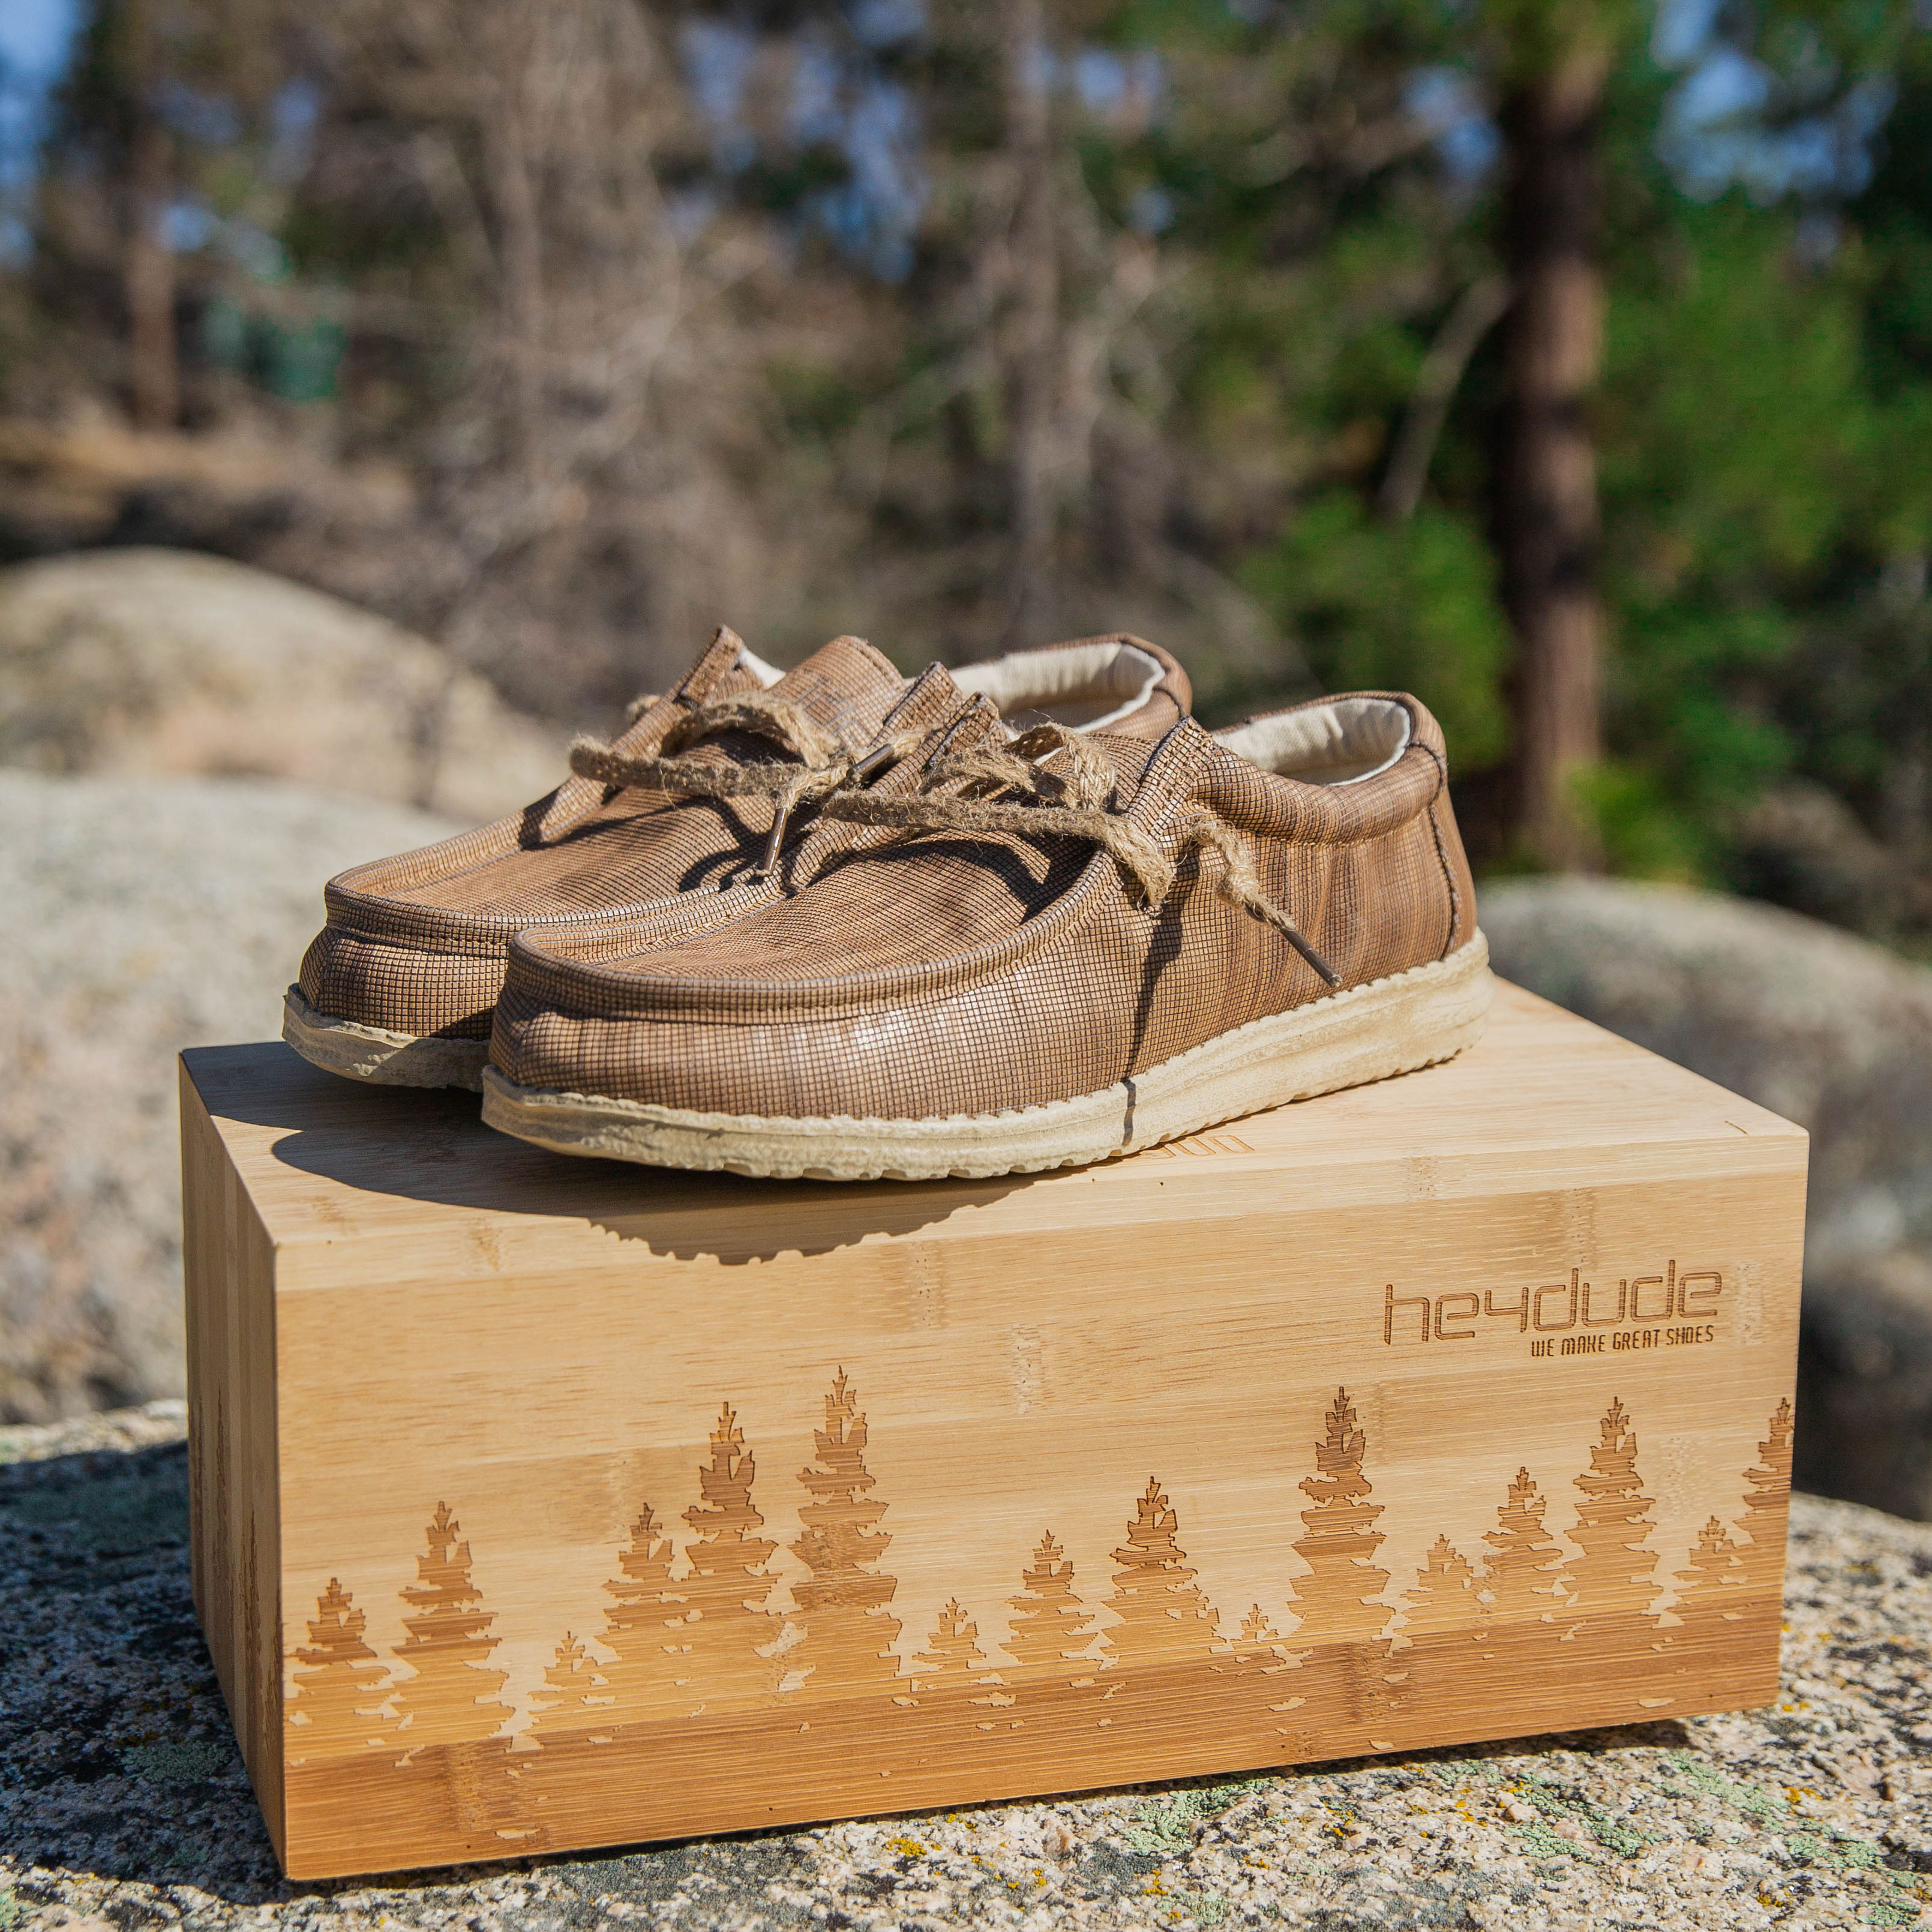 shoes made from wood